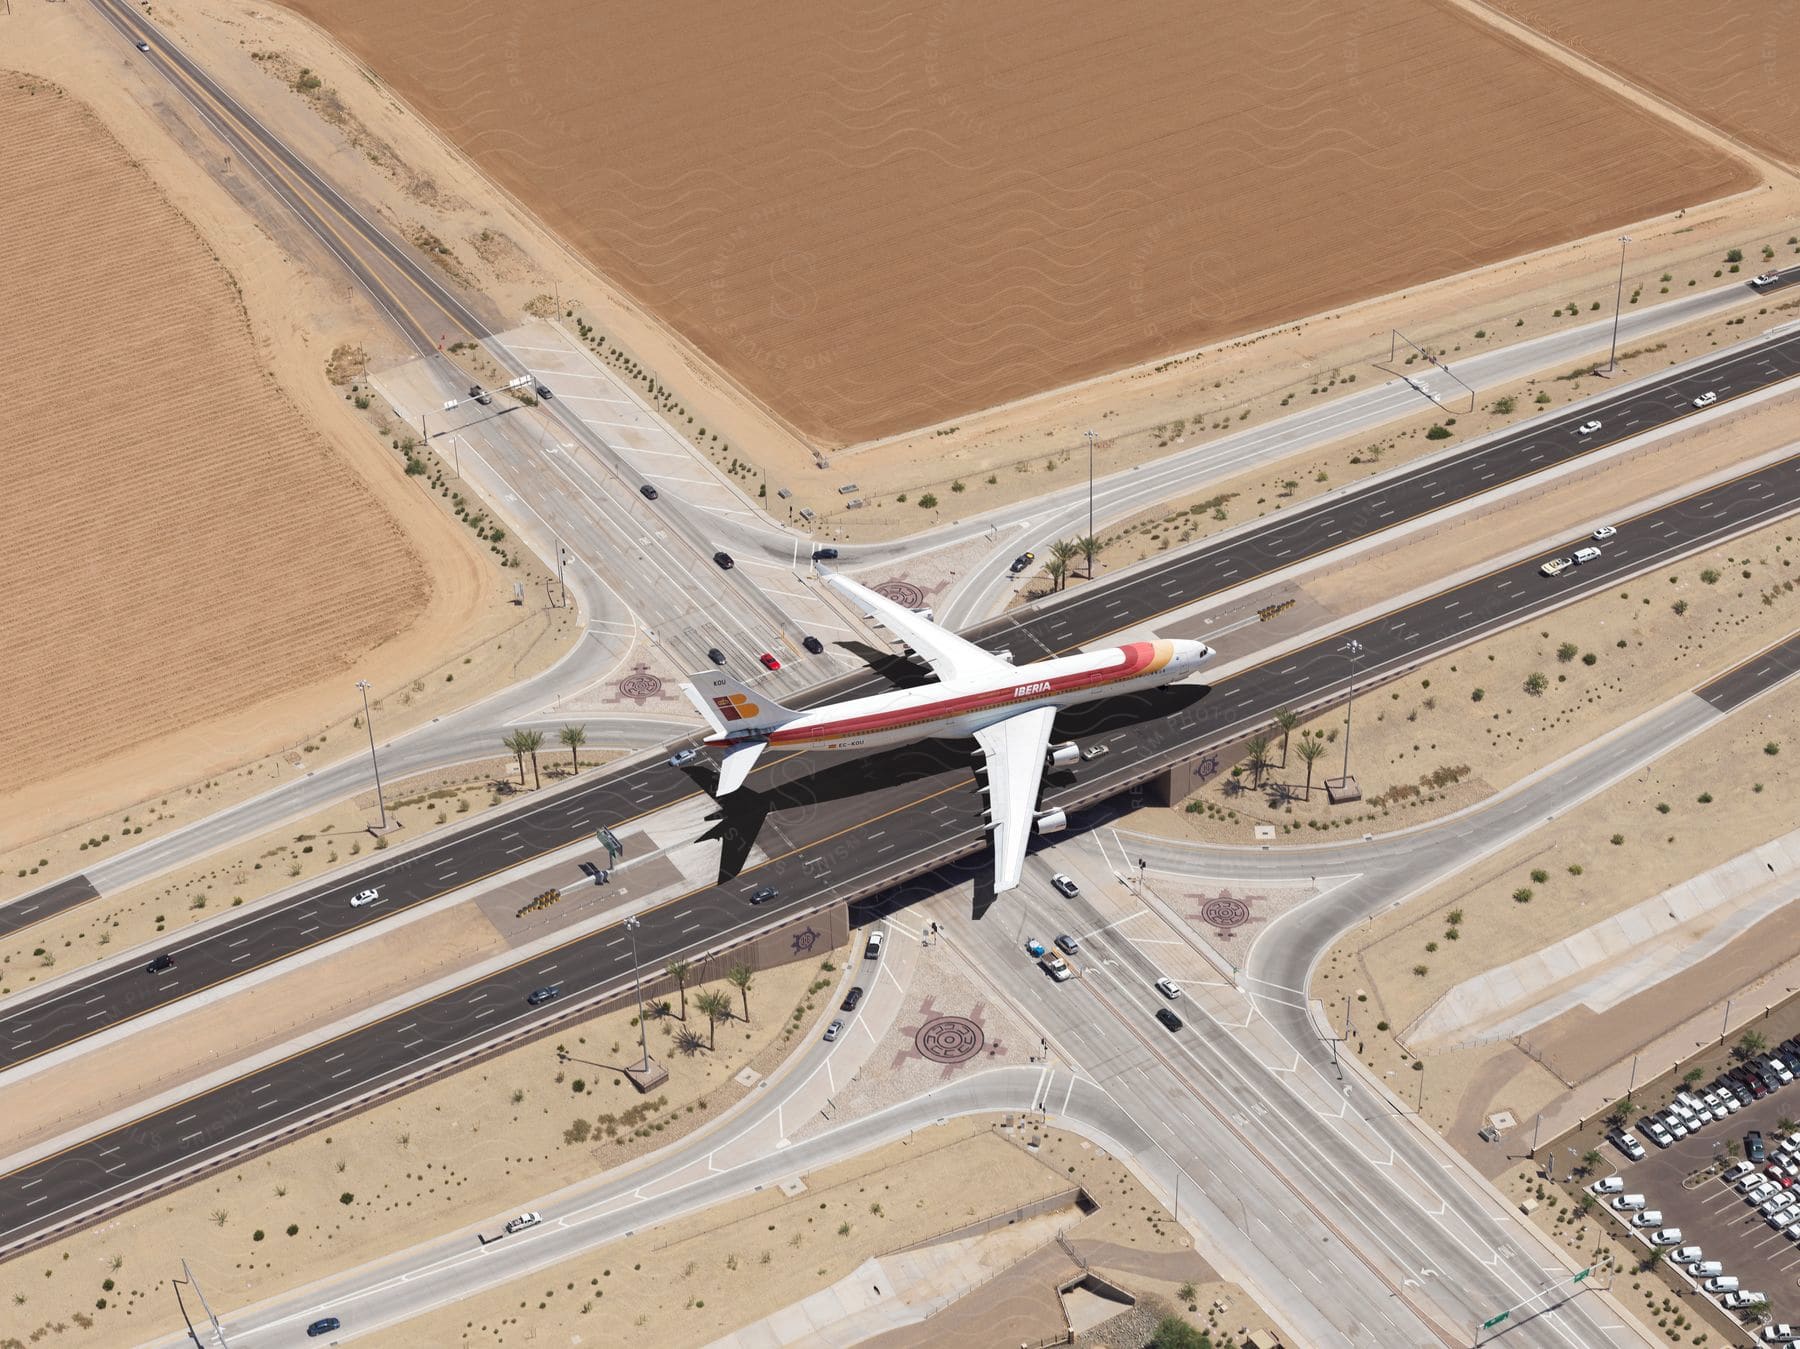 An iberia a340600 airplane is captured on a highway from an aerial perspective